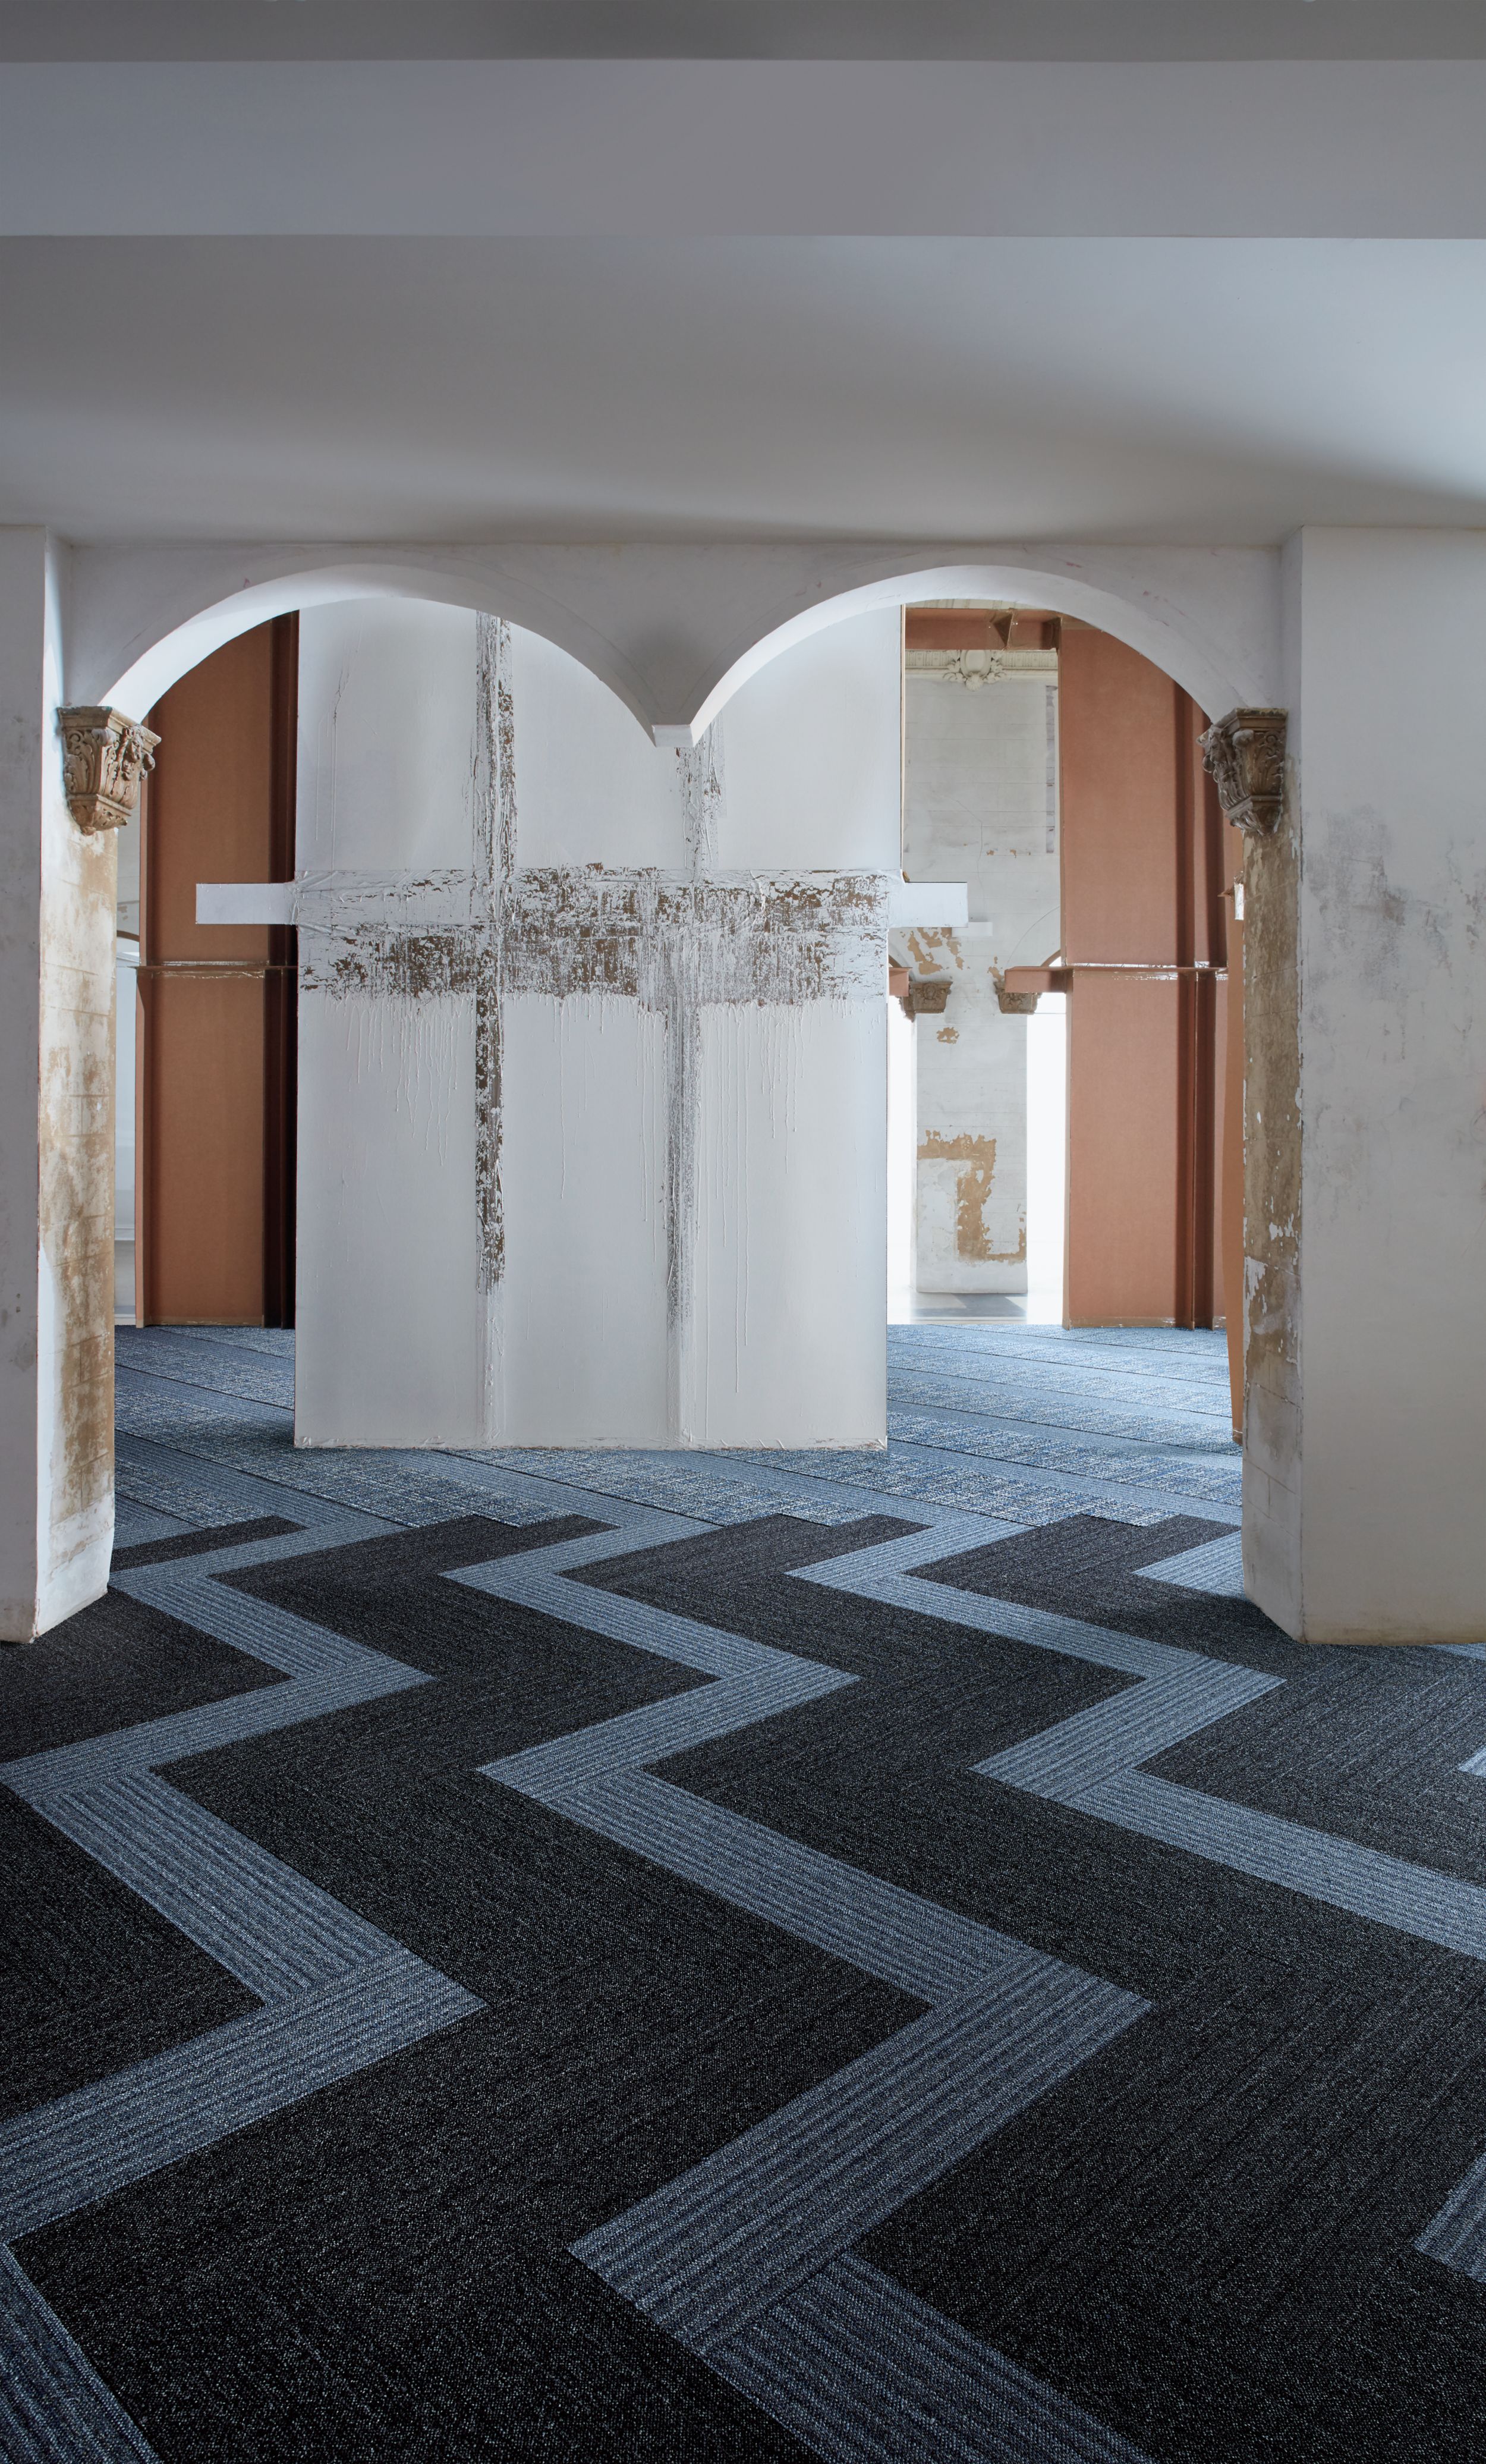 Interface WW865 and WW895 plank carpet tile in lobby setting with archway Bildnummer 6